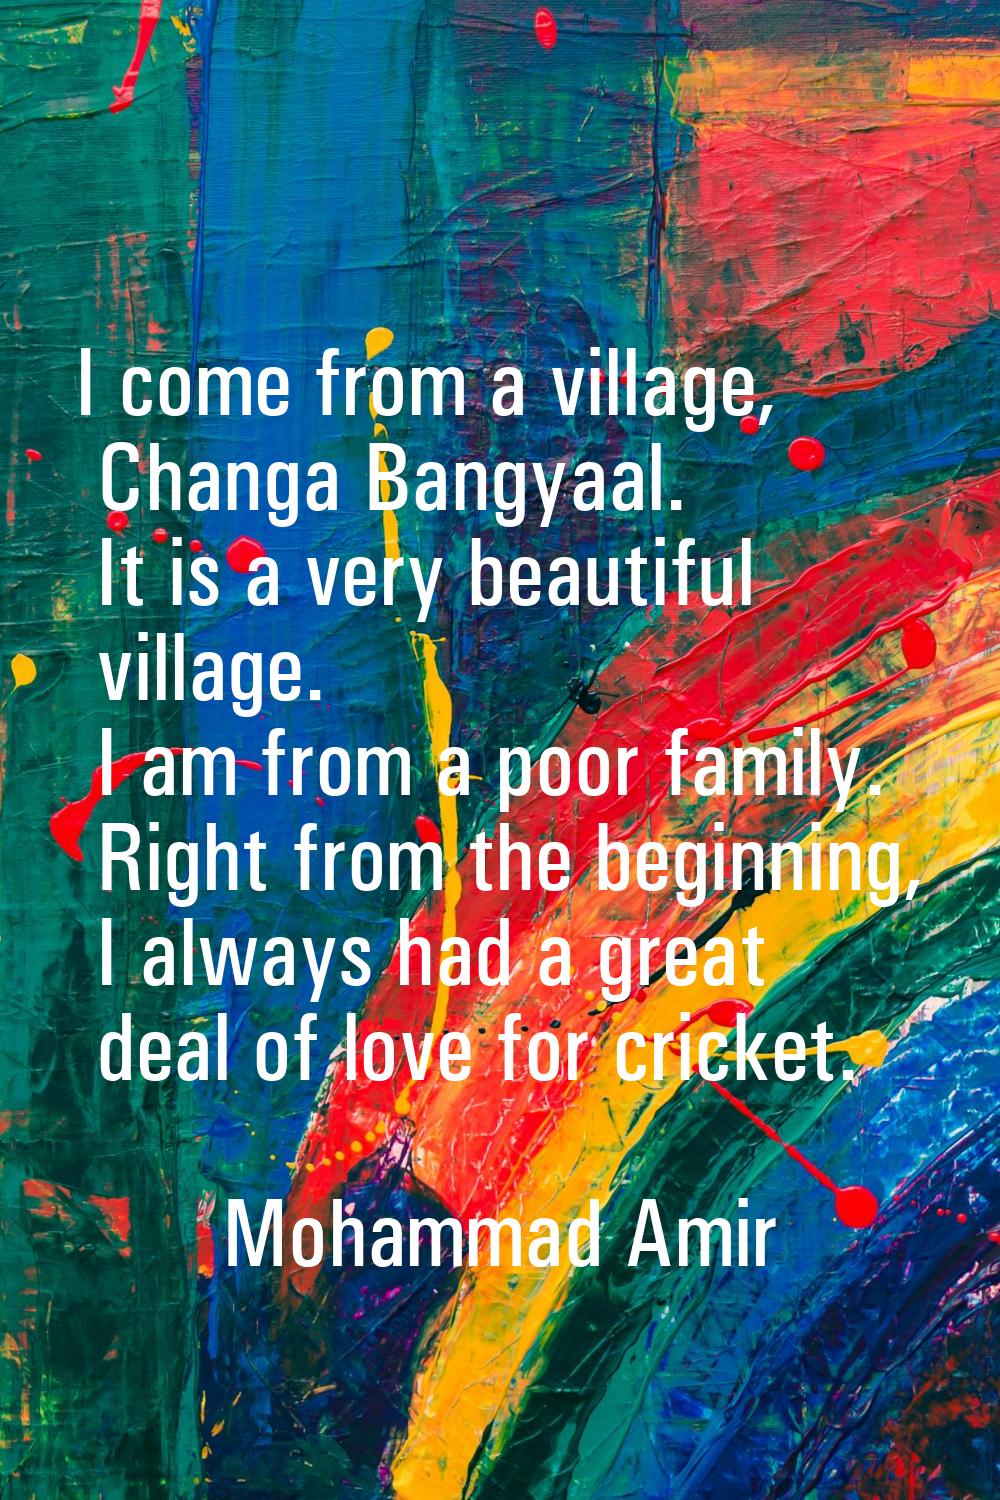 I come from a village, Changa Bangyaal. It is a very beautiful village. I am from a poor family. Ri